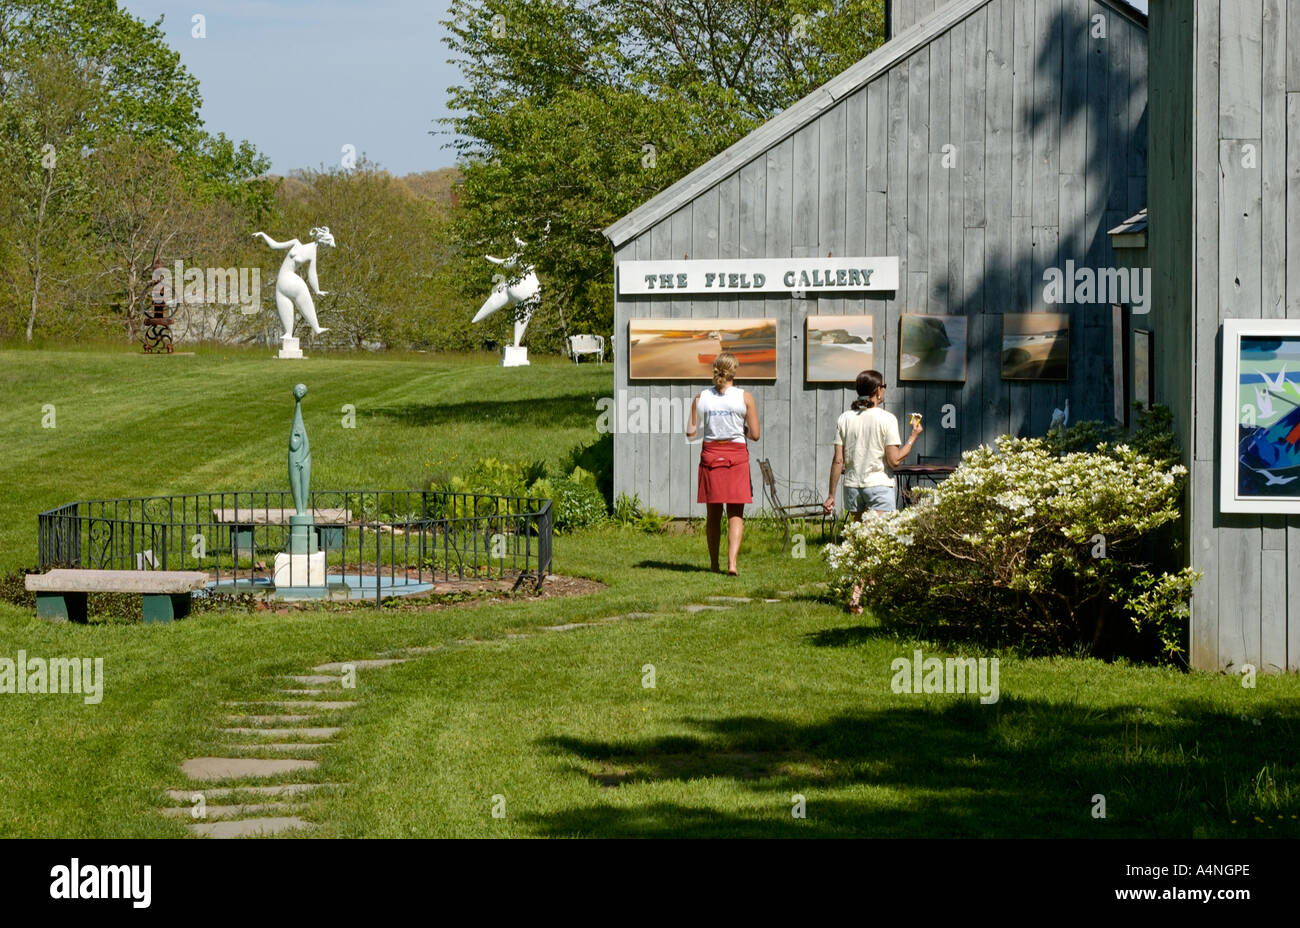 Tom Maley Sculptures in the Field Gallery with 2 Women Looking at Art, West Tisbury, Martha's Vineyard, MA, USA Stock Photo